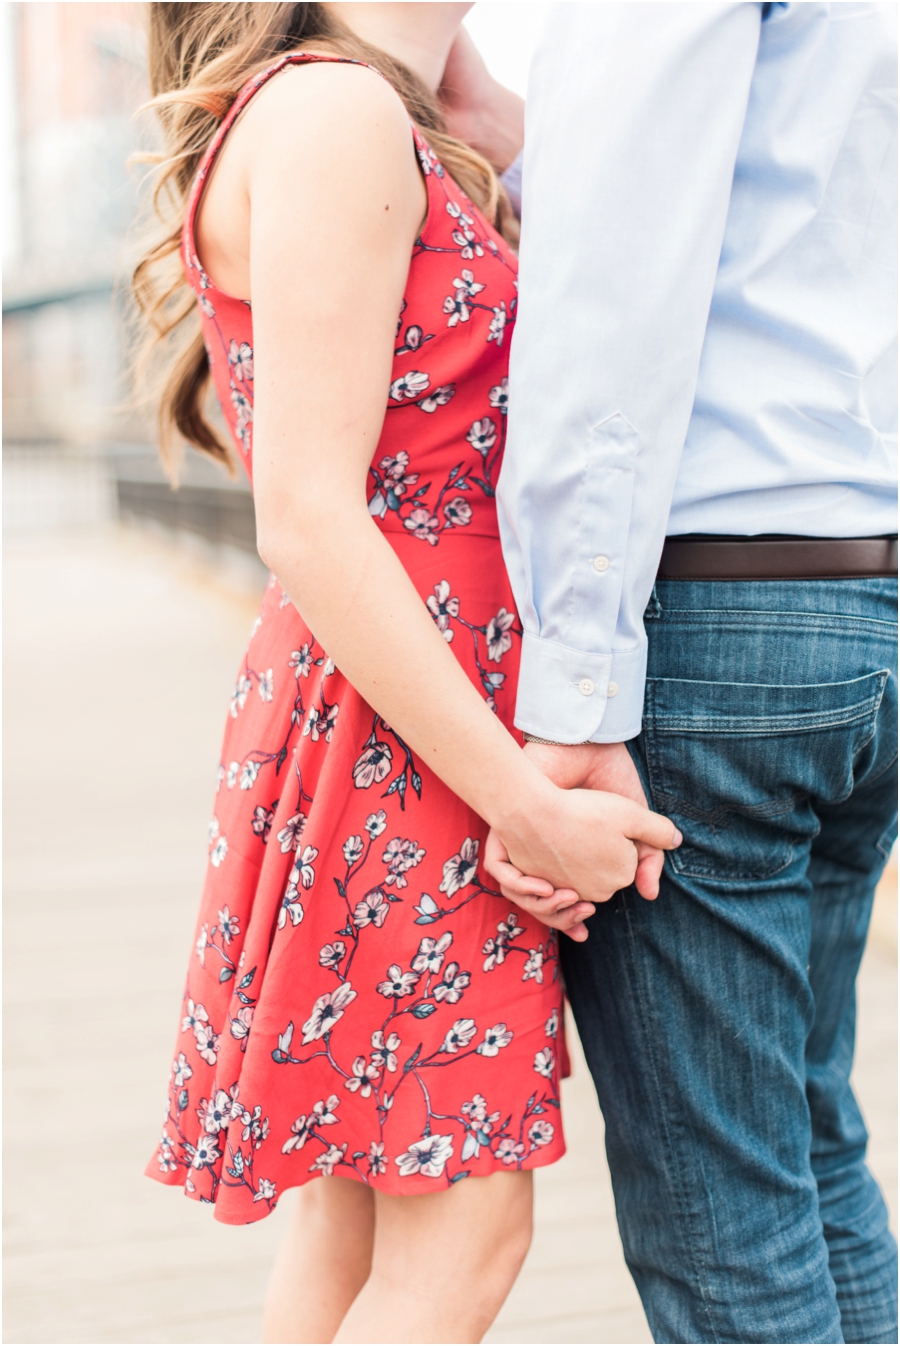  Jane's Carousel Brooklyn, NYC Engagement Session by Wedding Photographer Hillary Muelleck